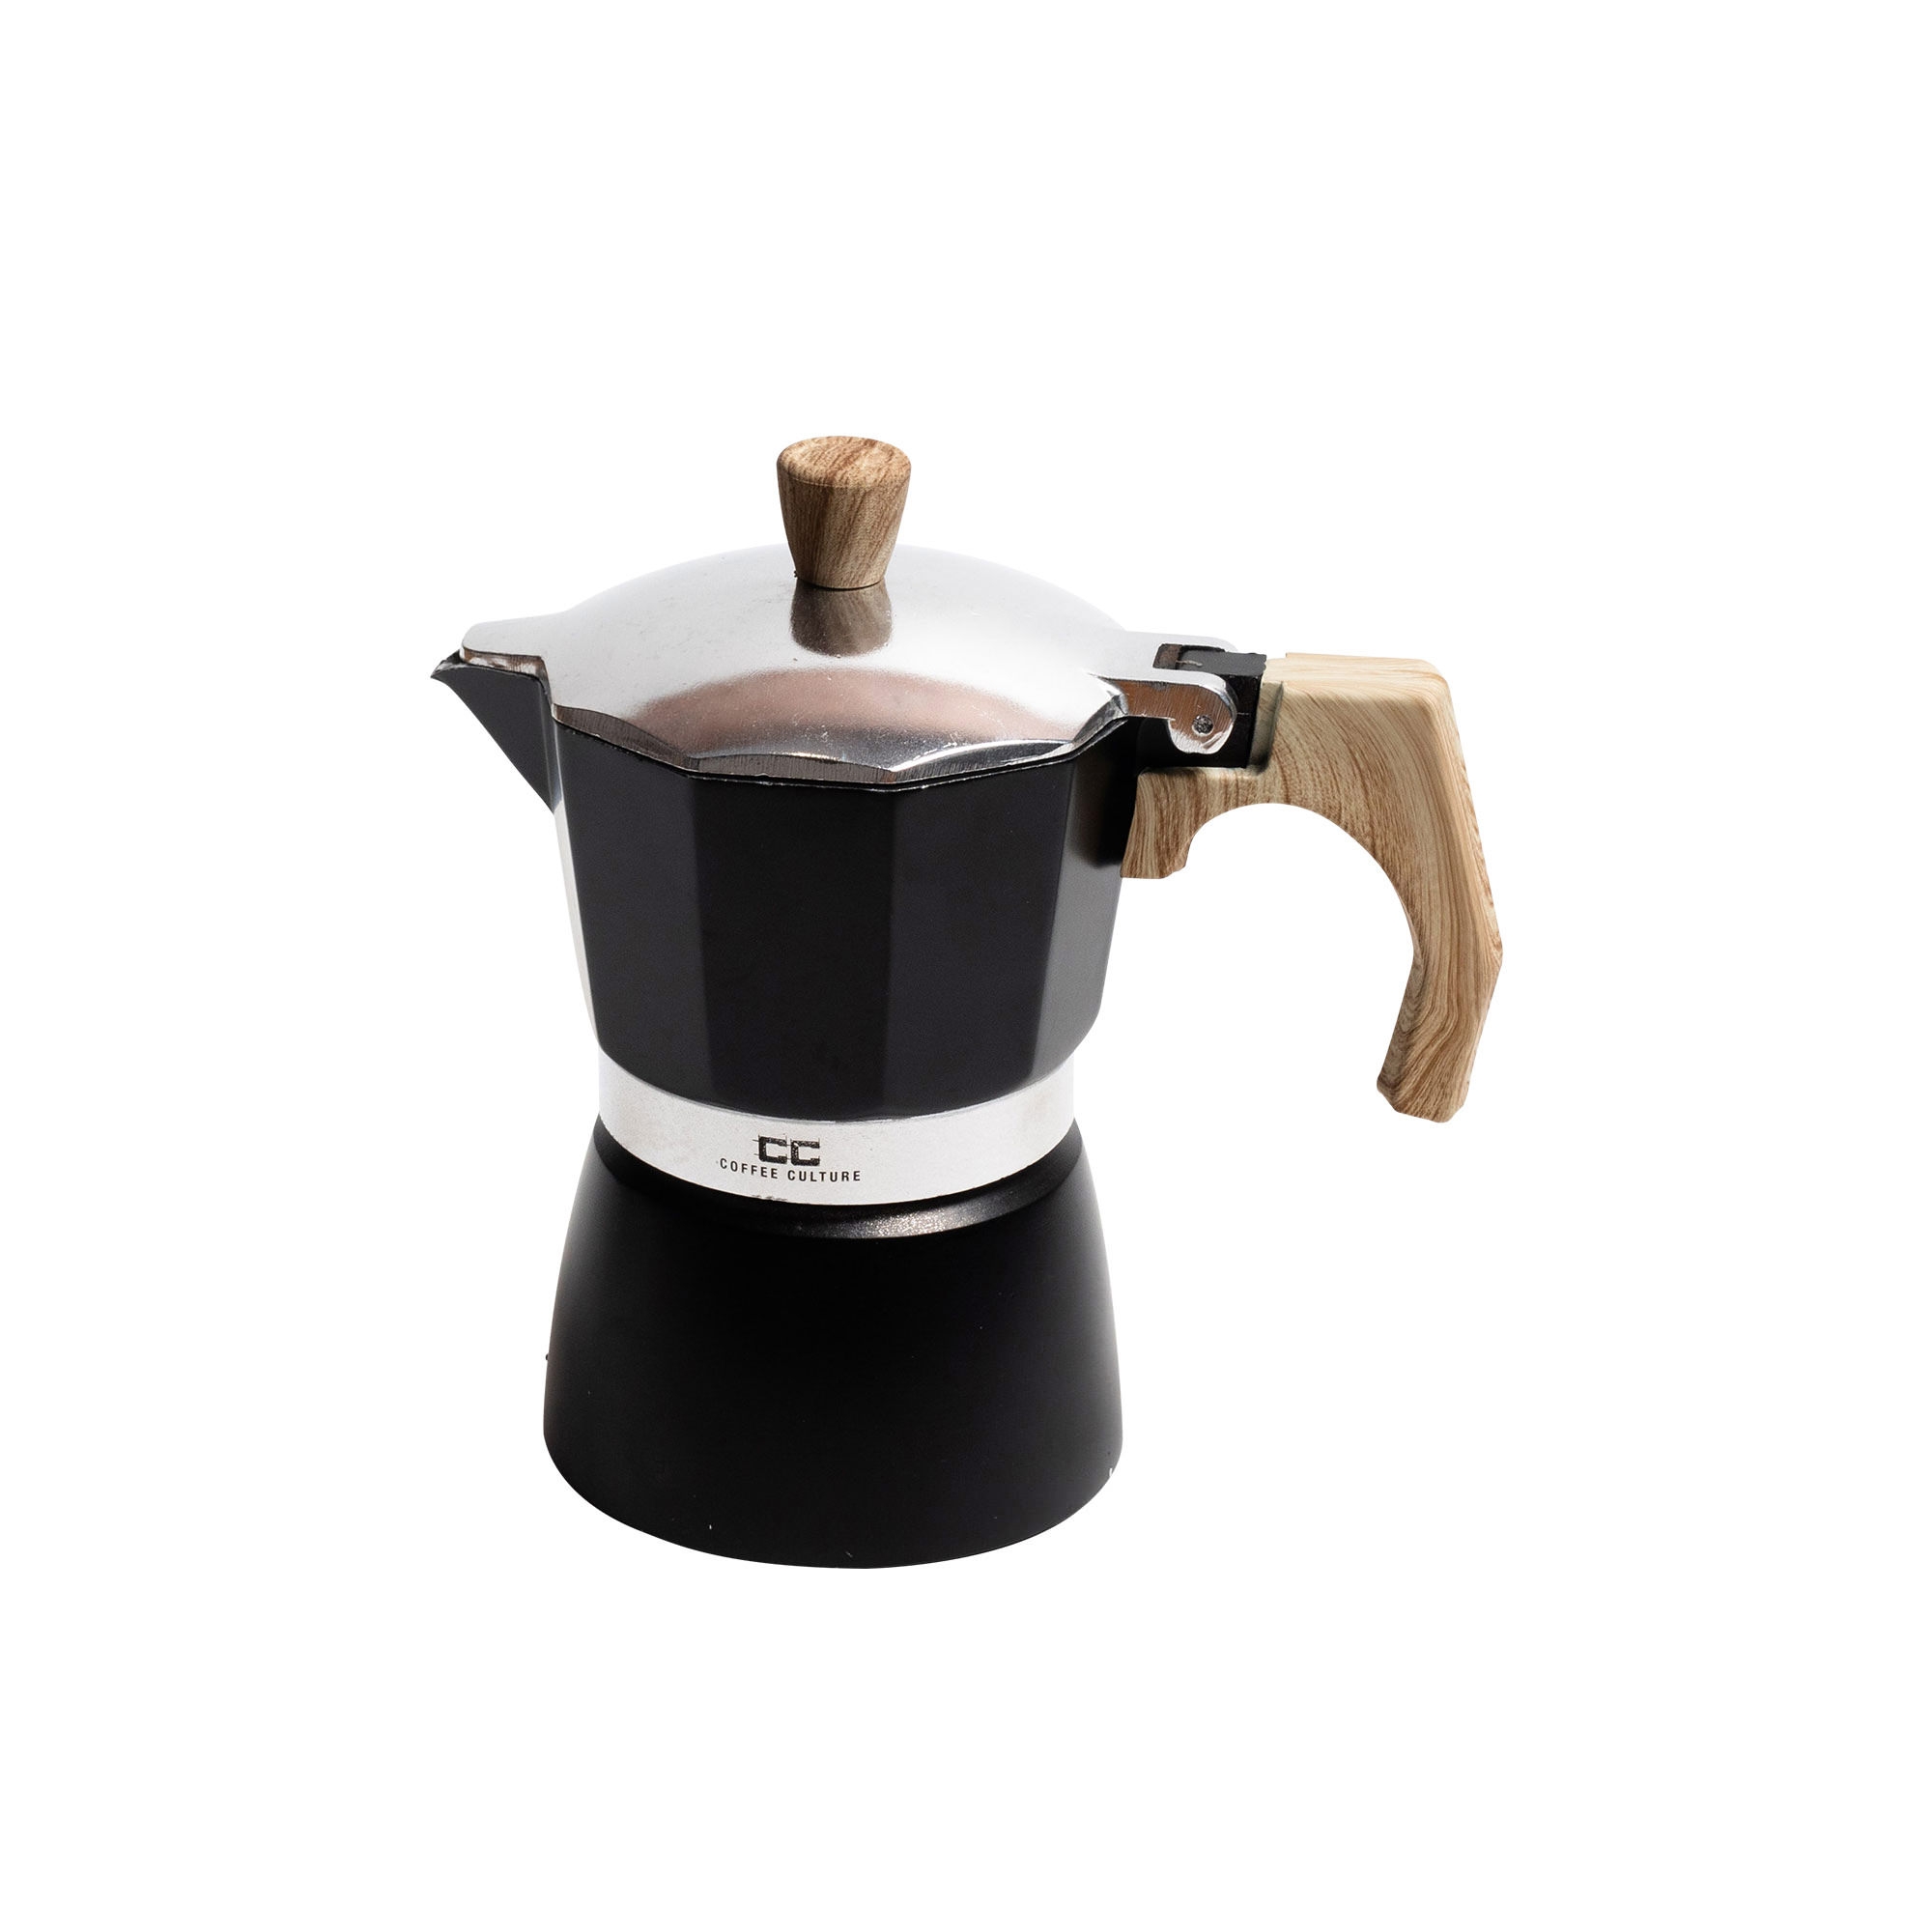 Coffee Culture Coffee Maker 3 Cup Black Image 1